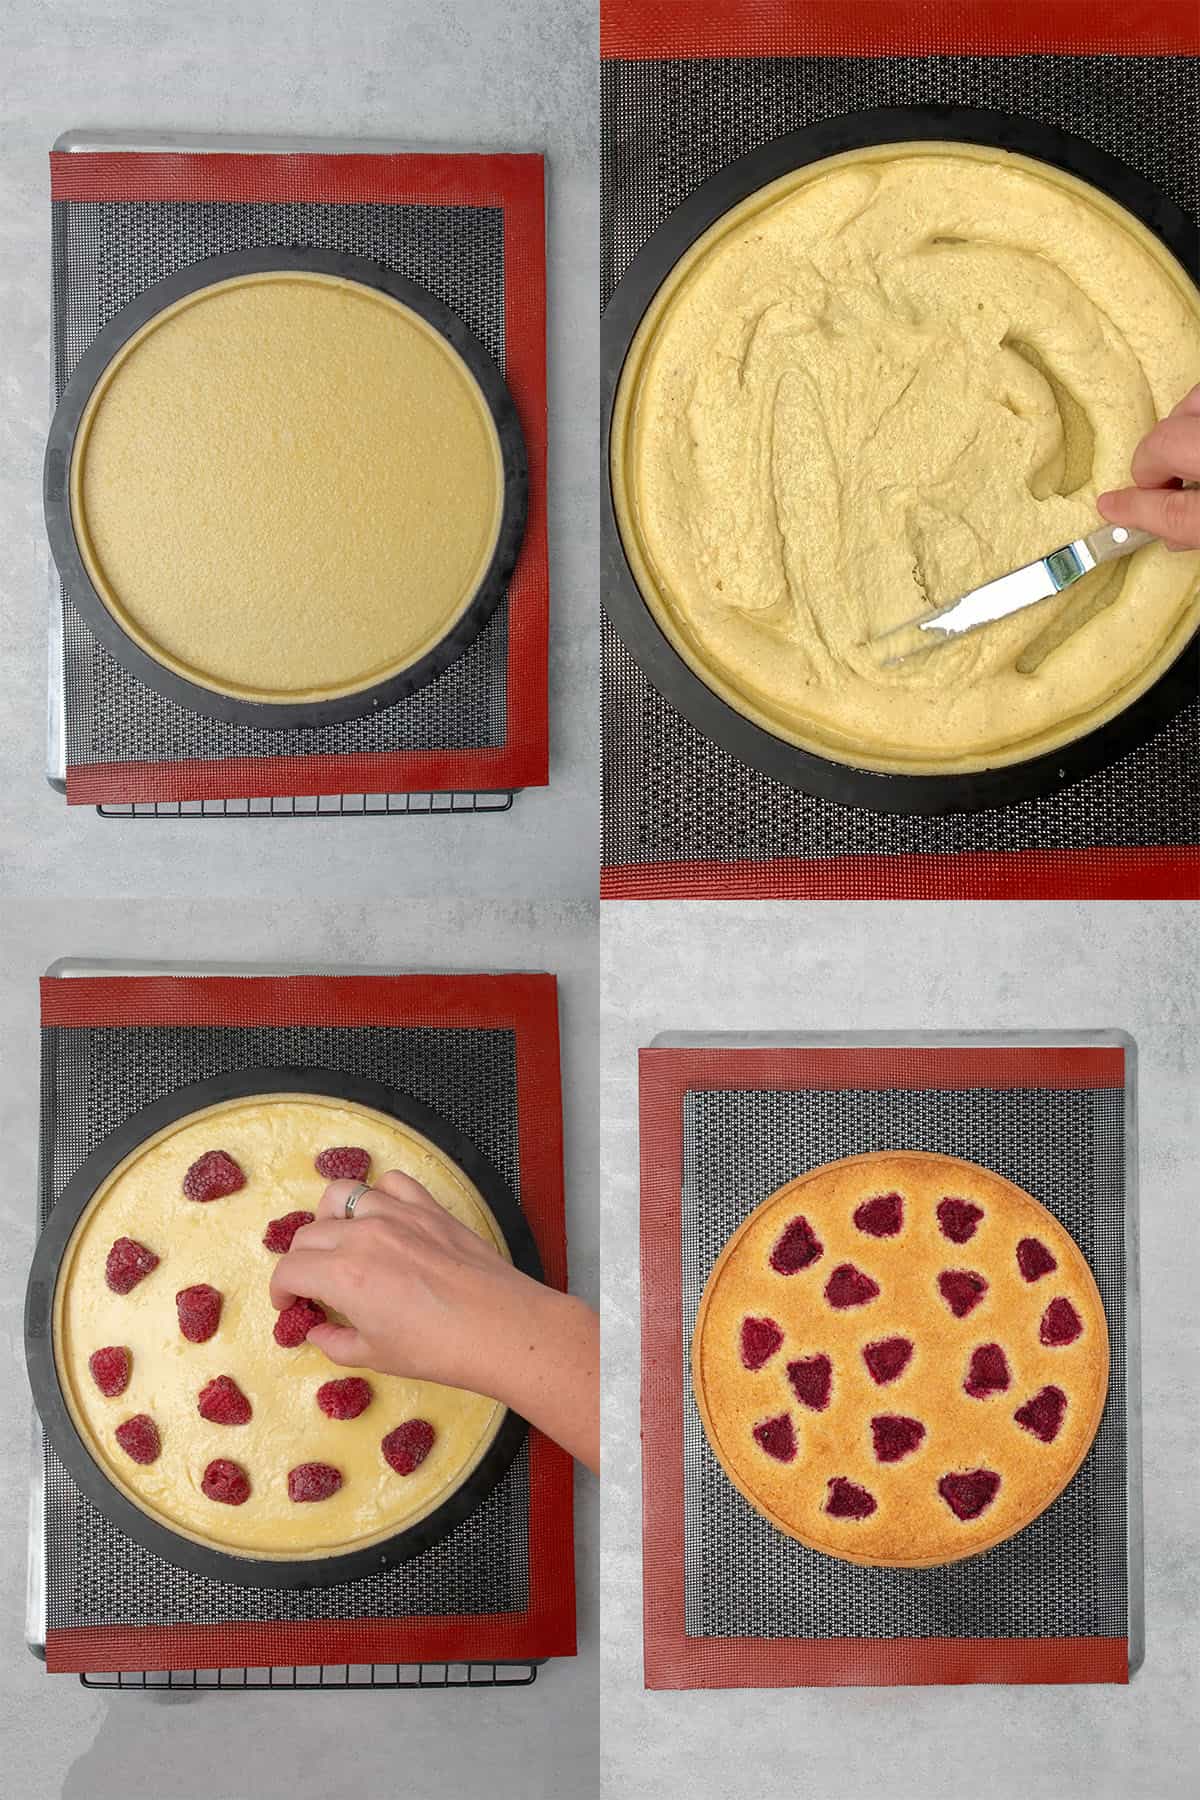 Step-by-step process of assembling the frangipane tart.